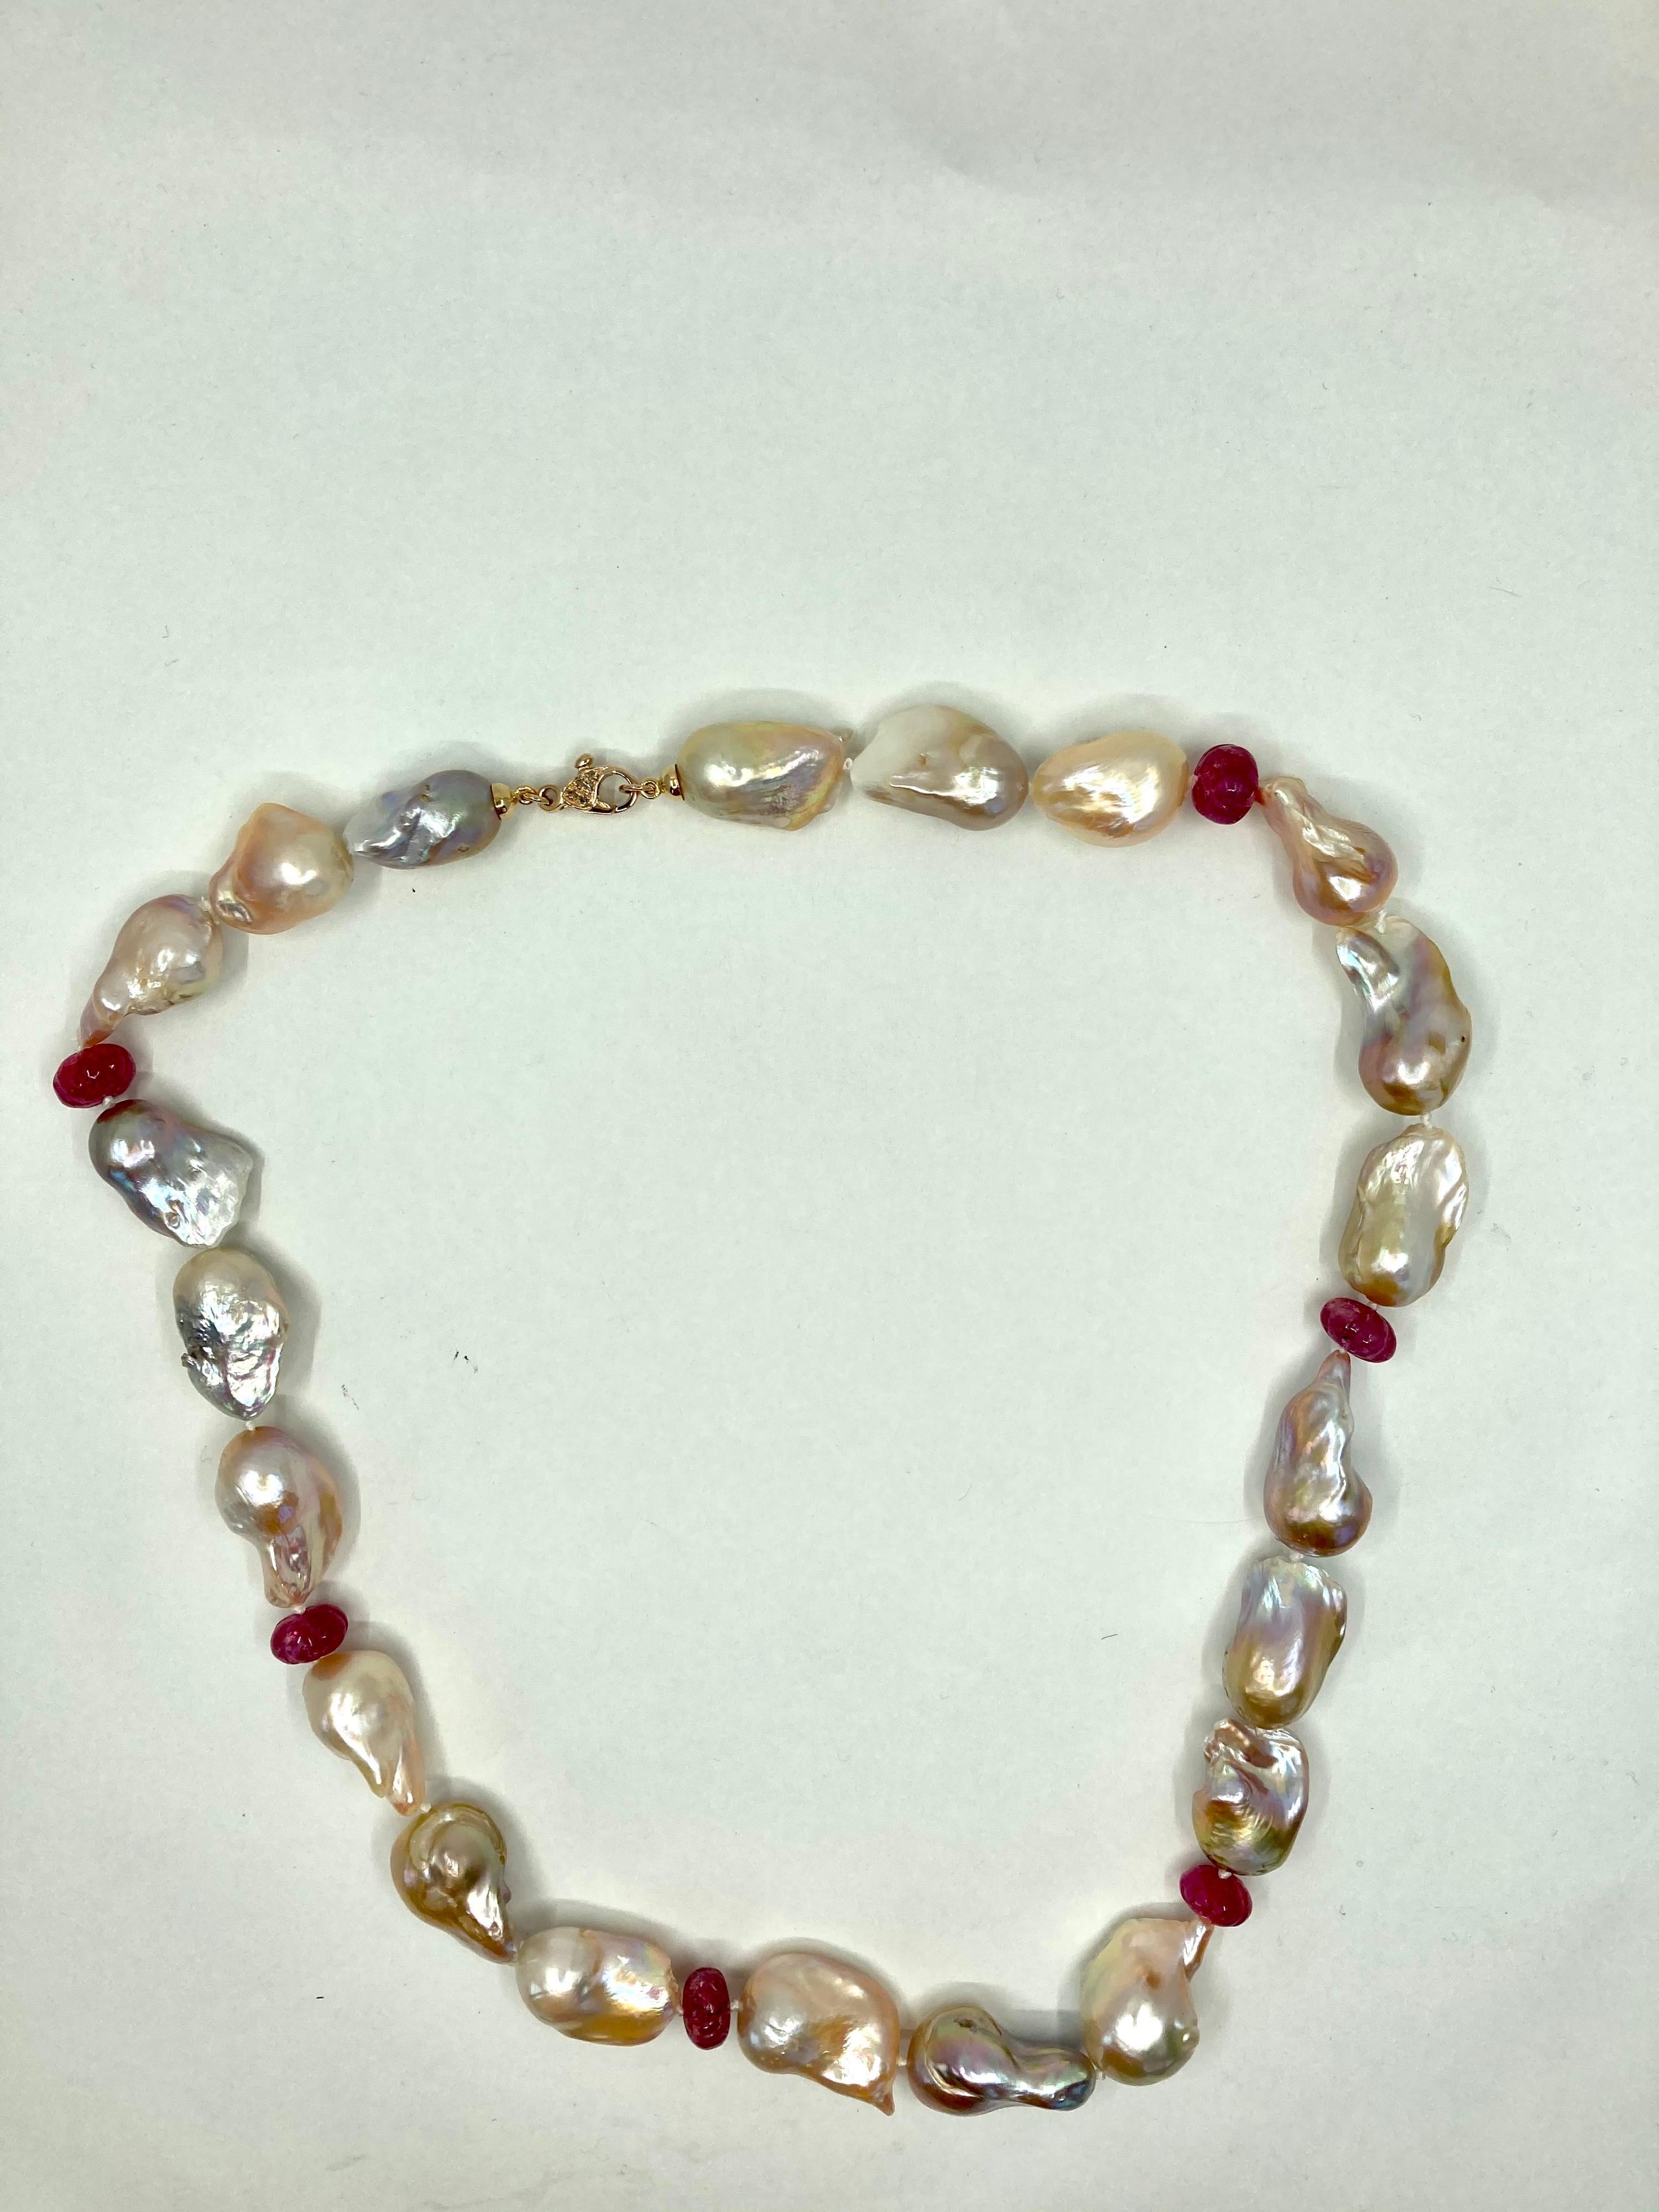 Timeless Yellow Gold Necklace, with Baroque Pearls gr. 118,70, Rubies ct. 51.00 and Brown Diamonds ct. 0.11, Made in Italy by Roberto Casarin.

A Simple but stylish design, distinguished by a combination of fine Baroque Pearls and onion shaped